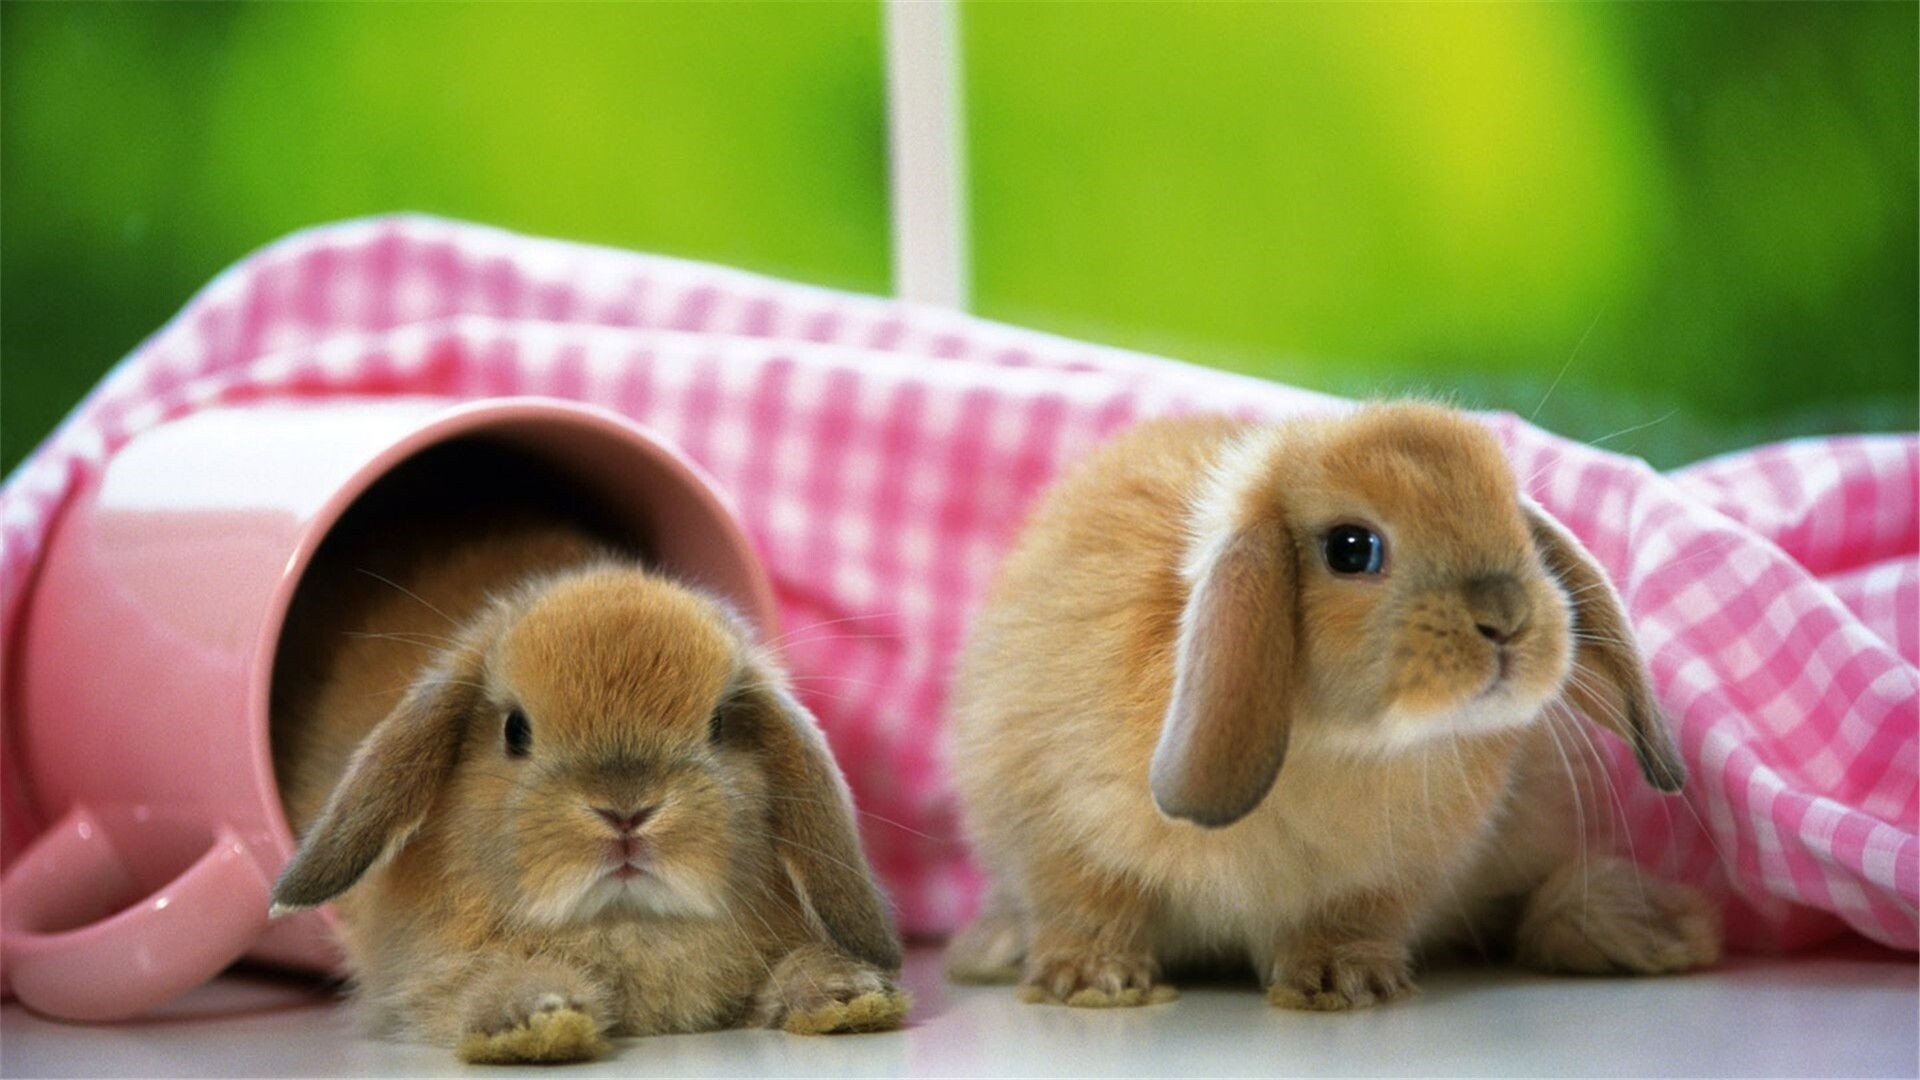 Rabbit: Furry mammals, Have close relation to animals such as pikas and hares. 1920x1080 Full HD Wallpaper.